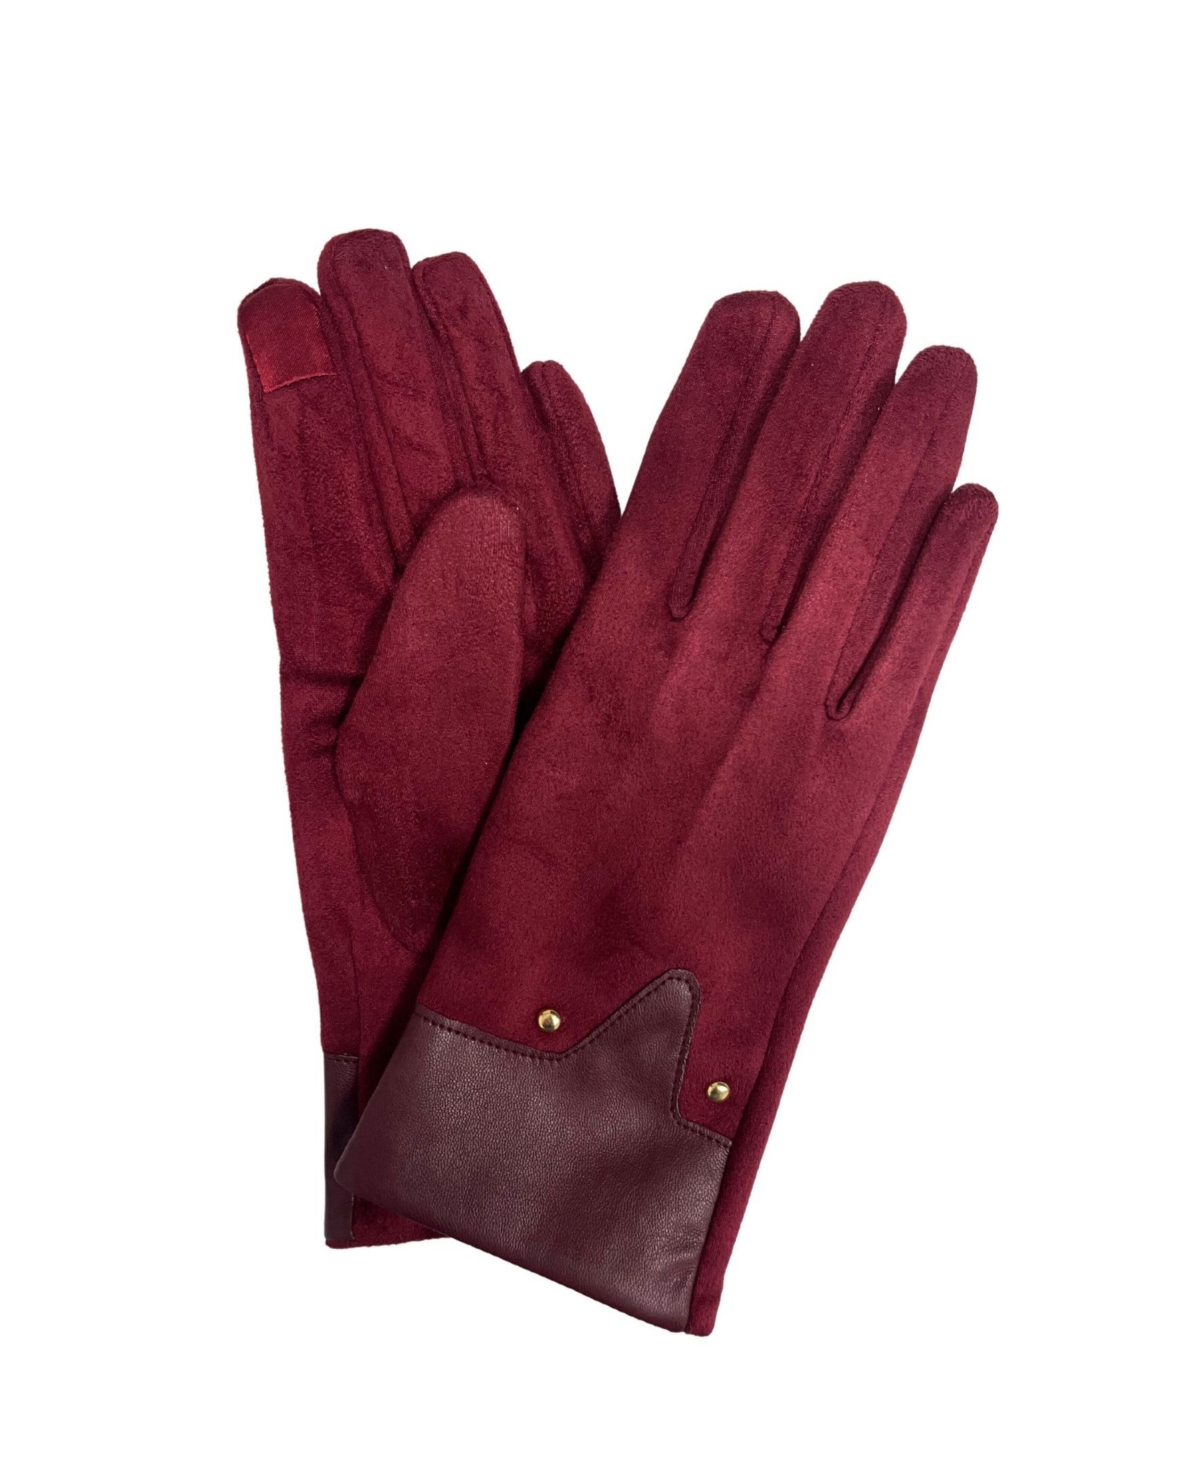 Marcus Adler Faux Suede Touchscreen Glove In Burgendy